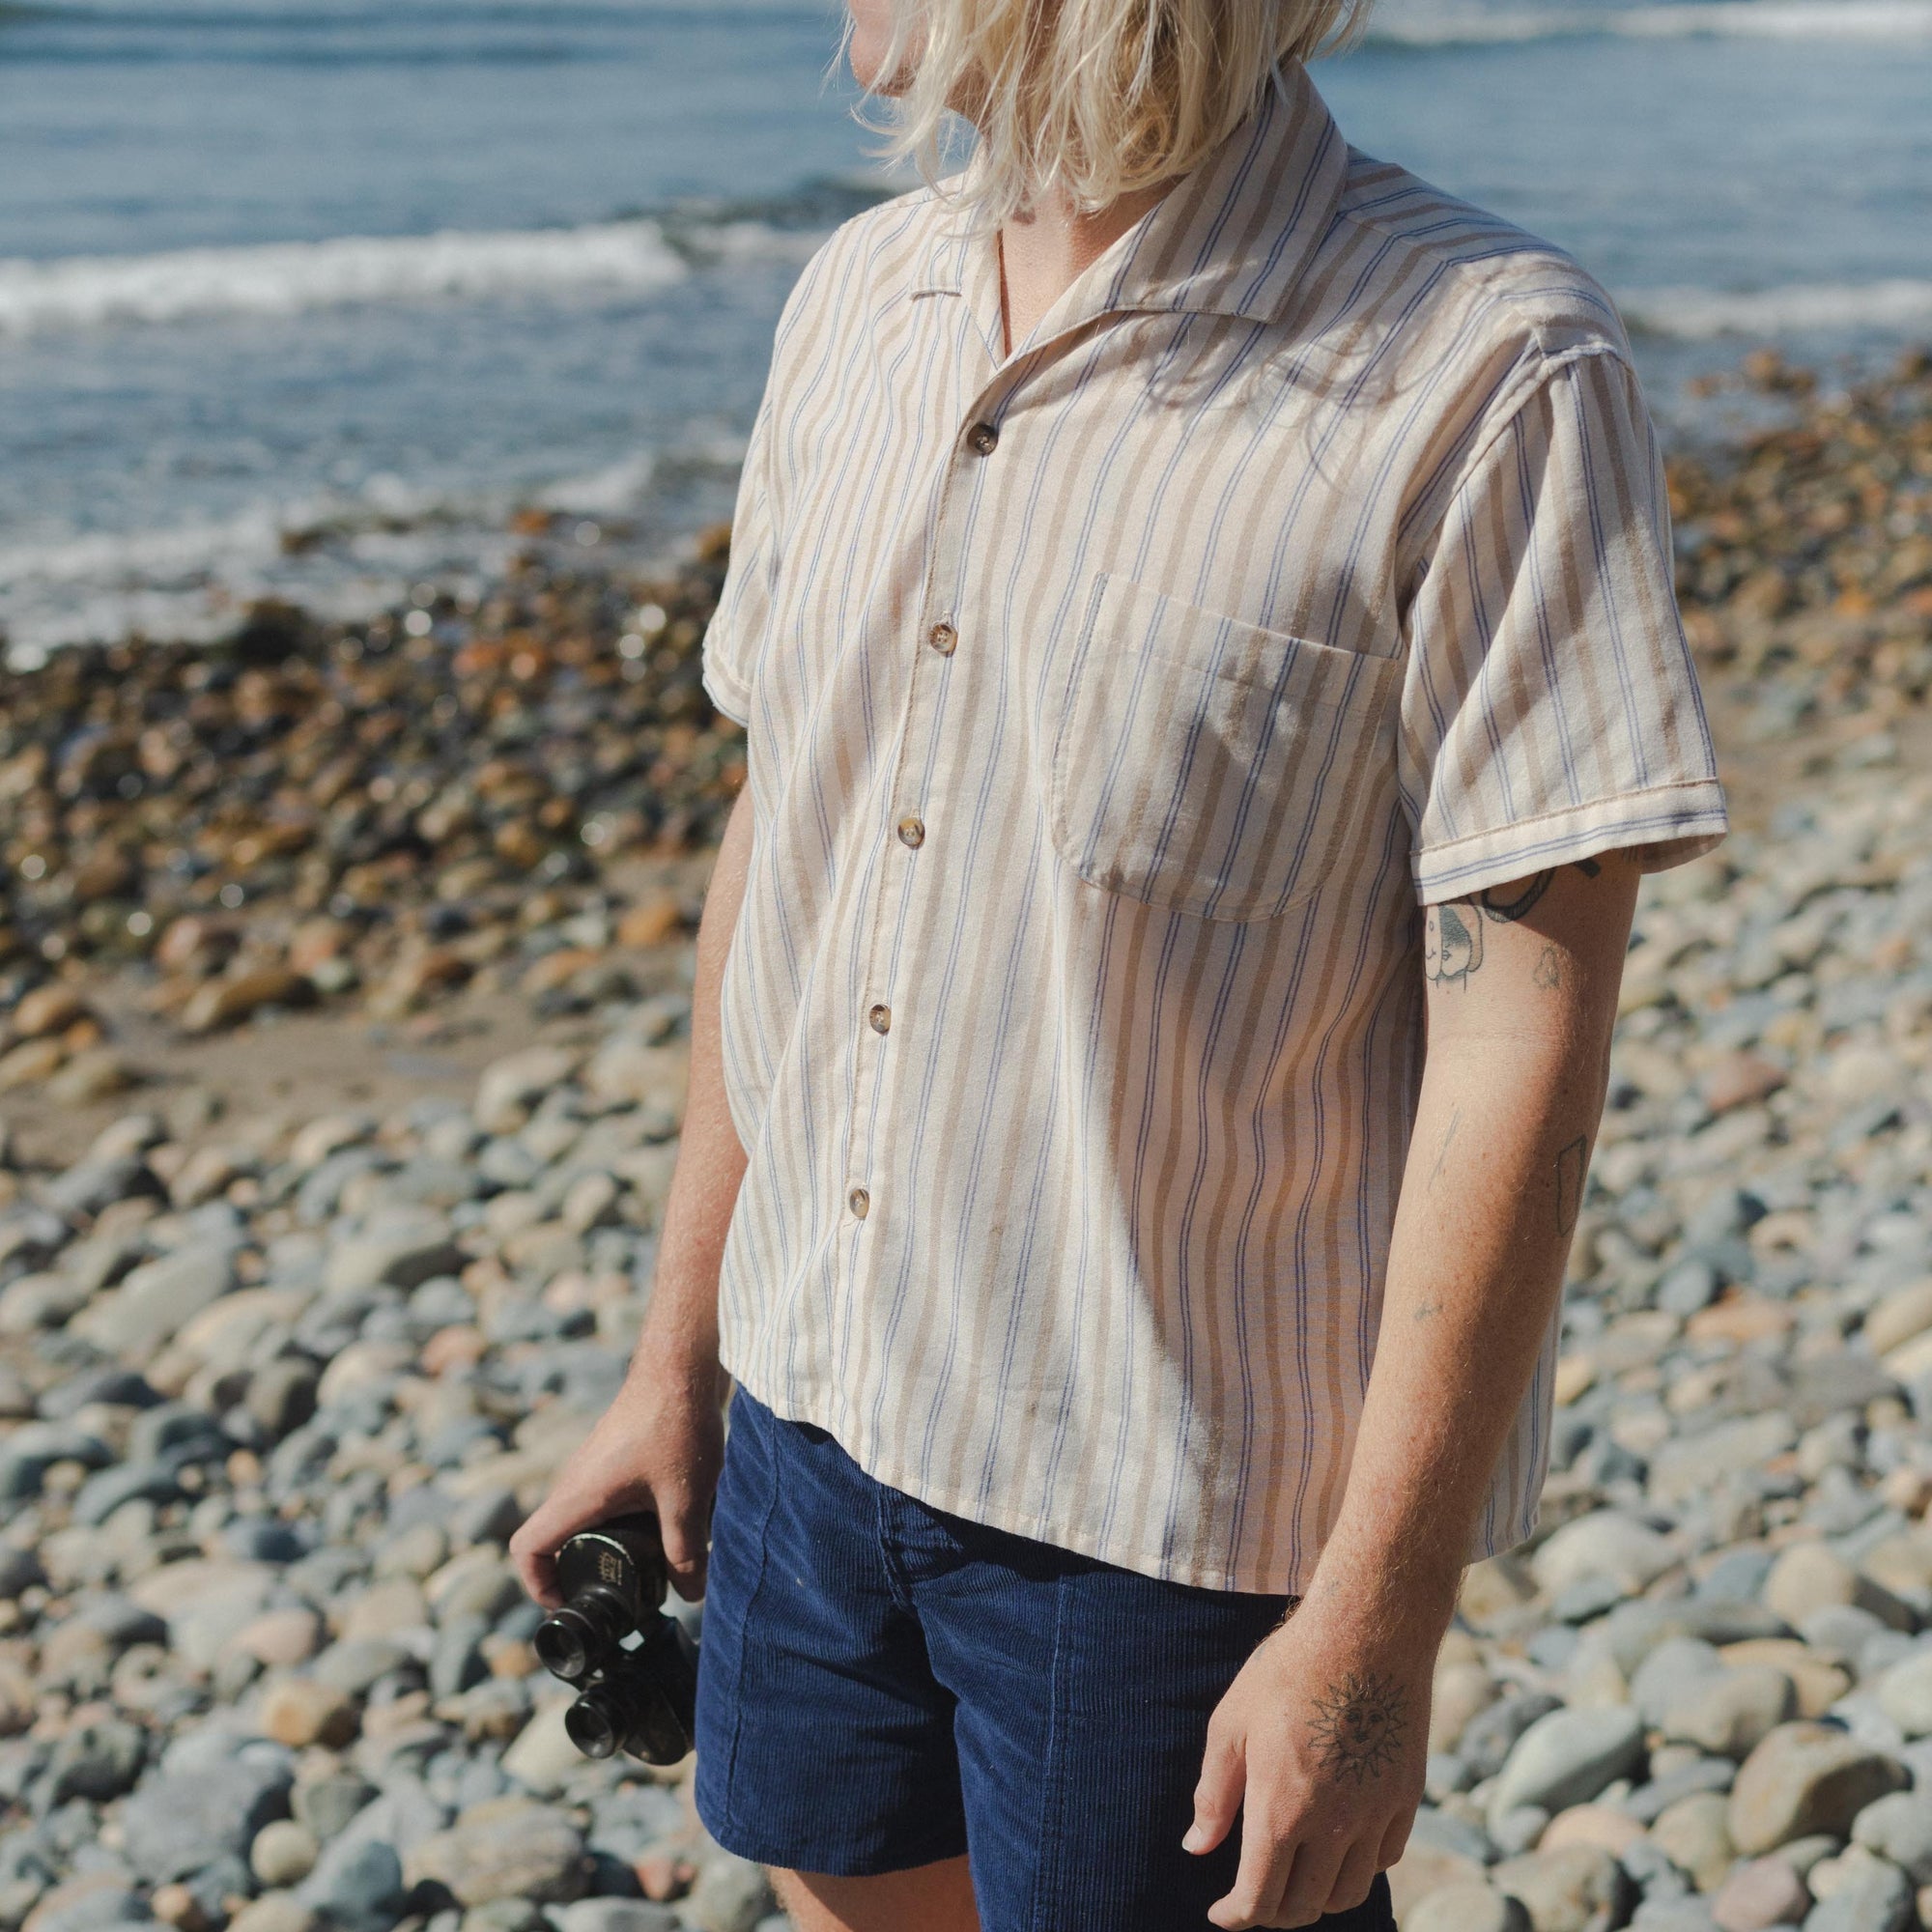 Mens Boxy Striped Button-Up Shirt in Cream and Corduroy Shorts in Blue